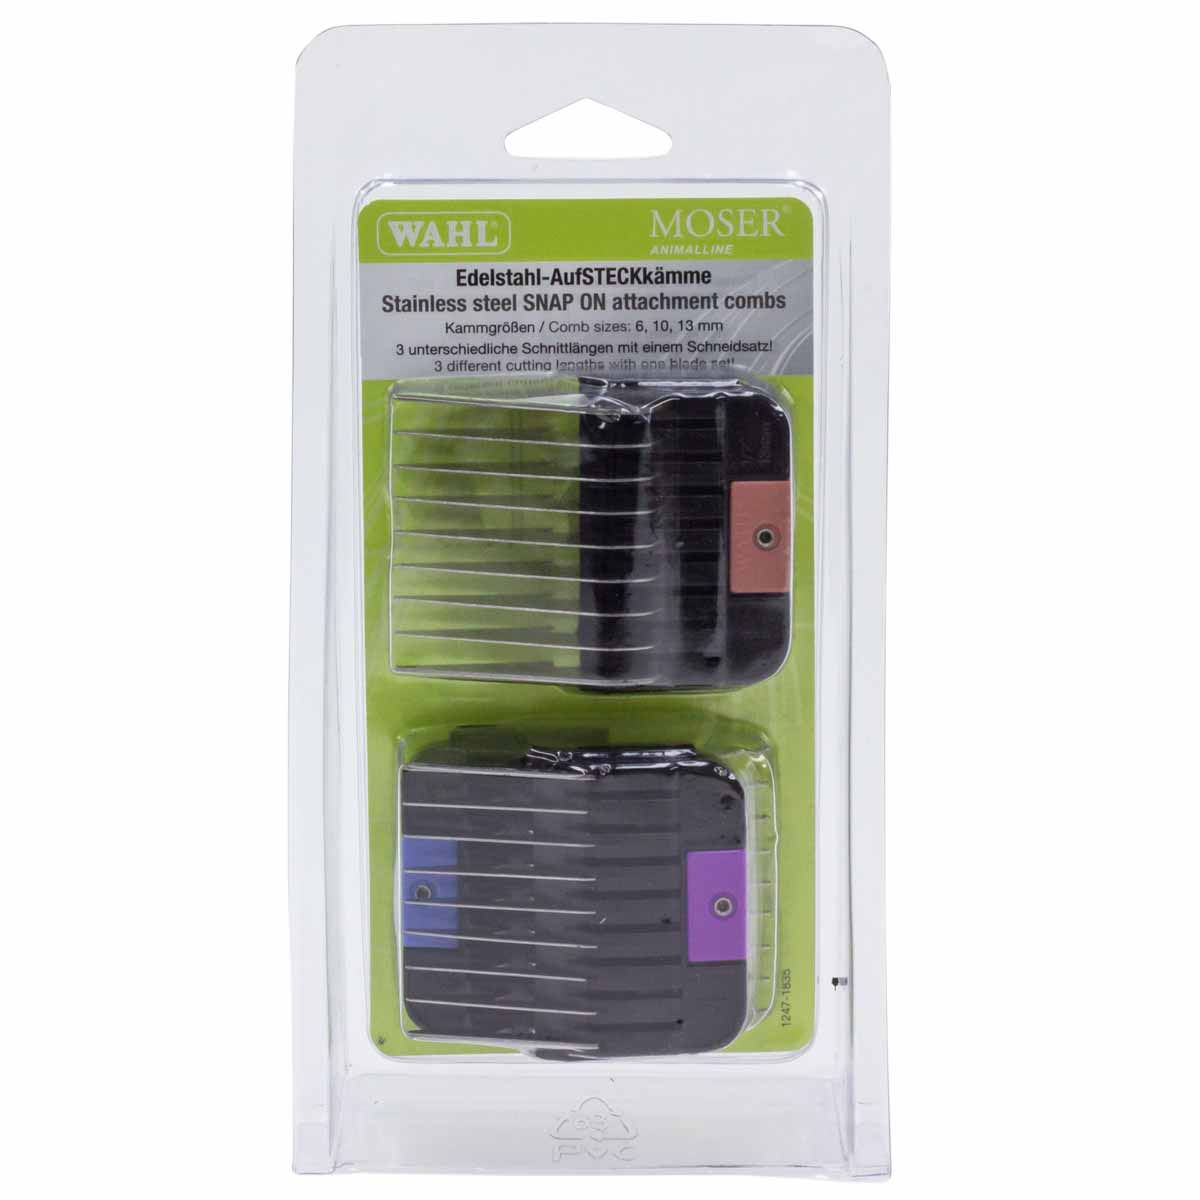 Wahl stainless steel snap-on combs set 6,10,13 mm for Moser Max 45/50